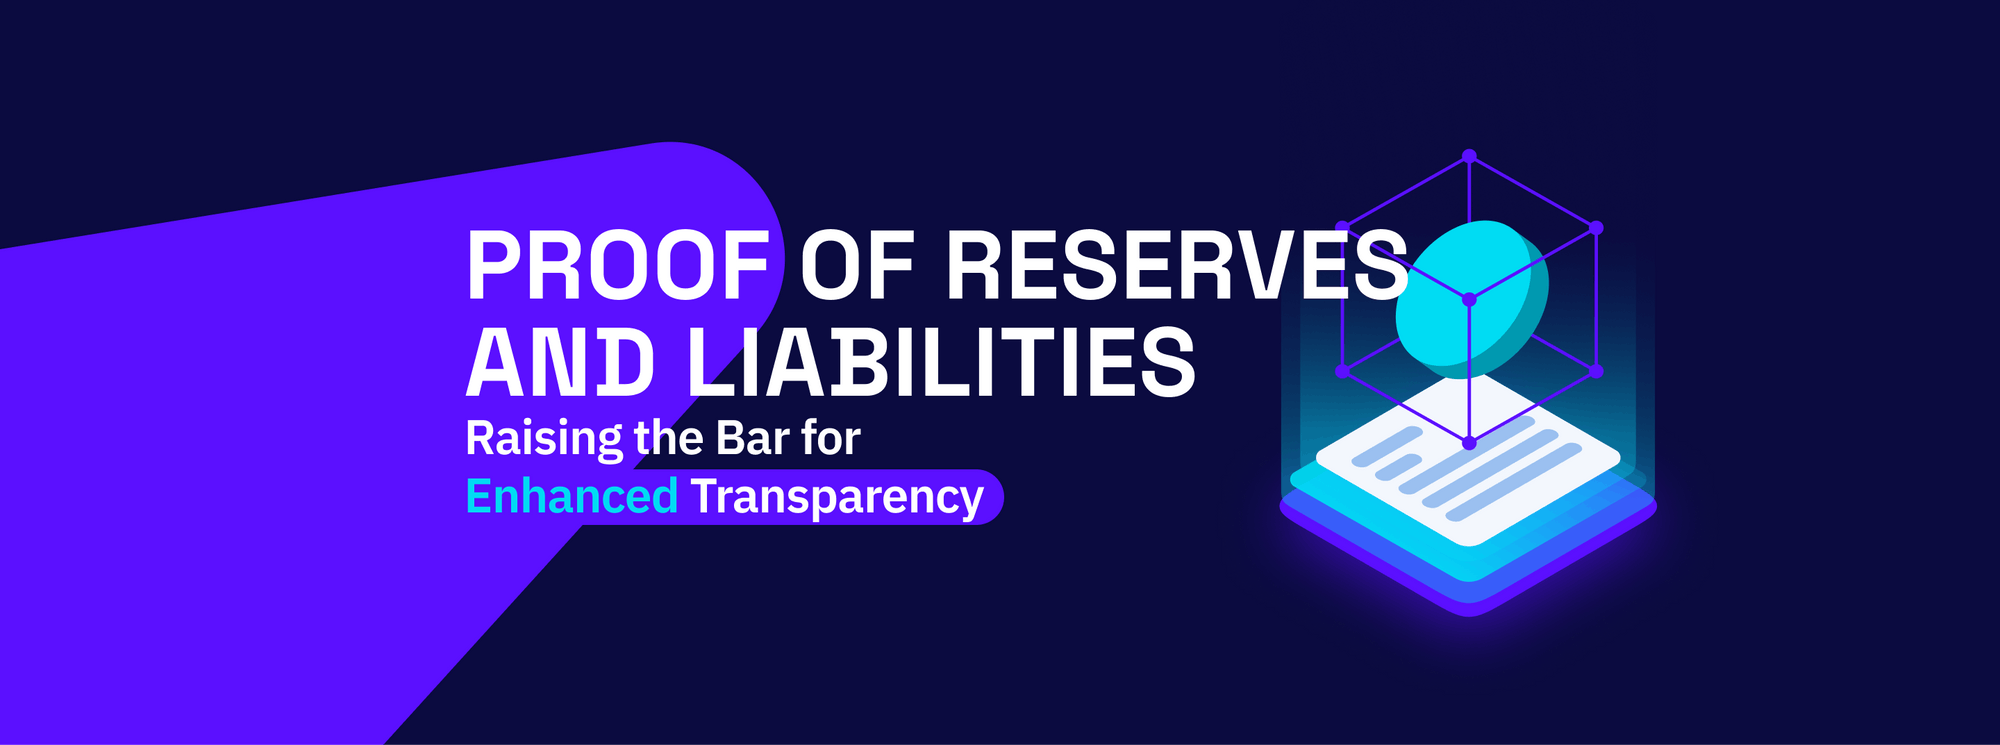 Singapore-based Cake DeFi publishes Merkle tree-based Proof of Reserves and Liabilities; raises the bar for enhanced transparency